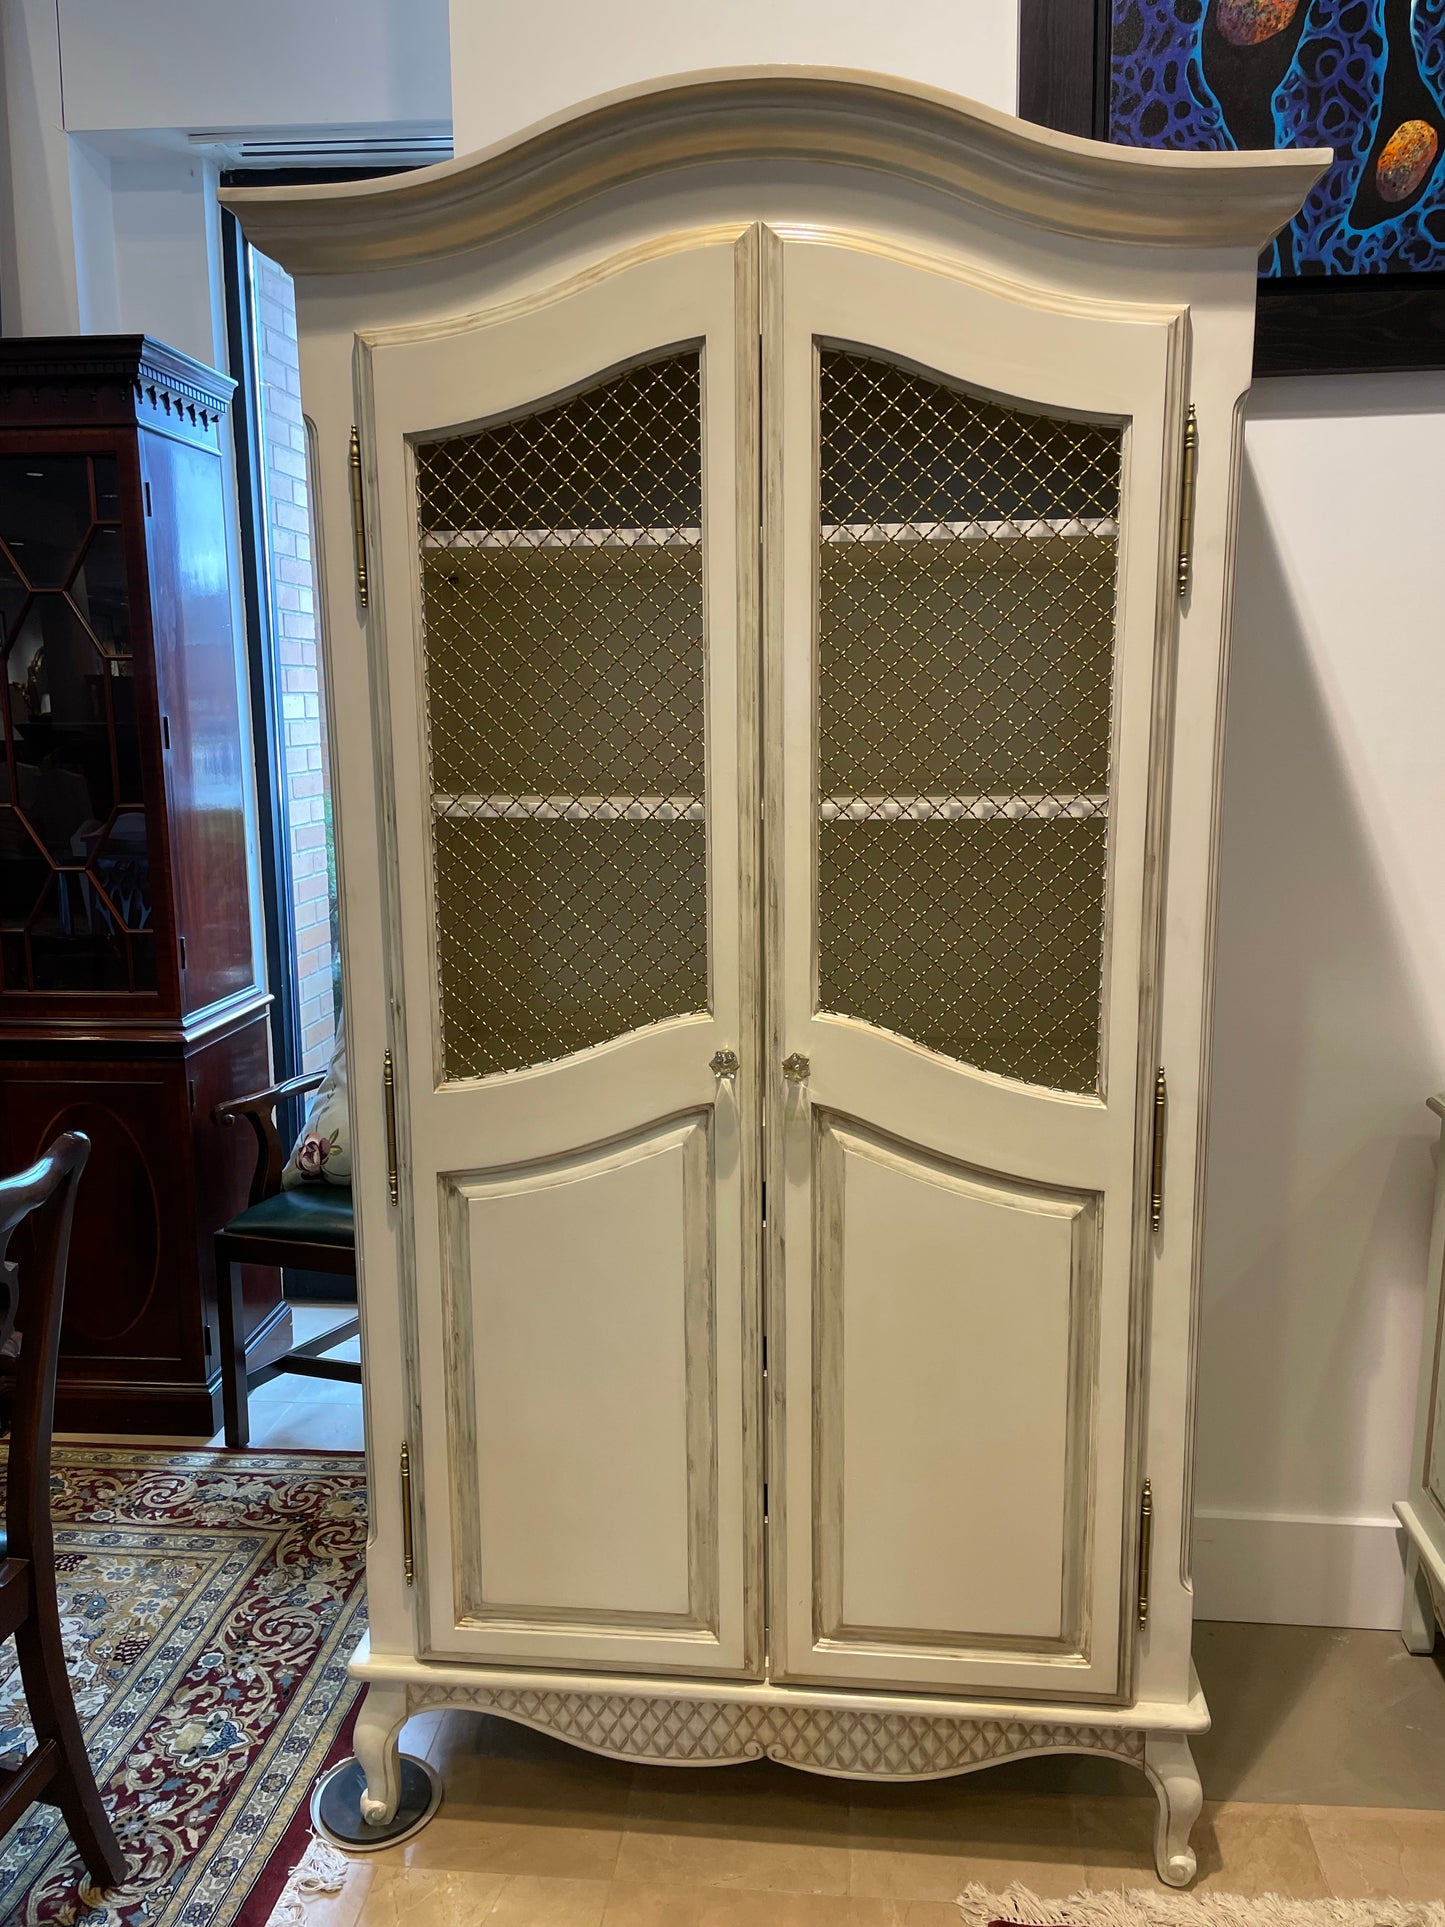 AFK Furniture "Grand Armoire" in Versailles Pink